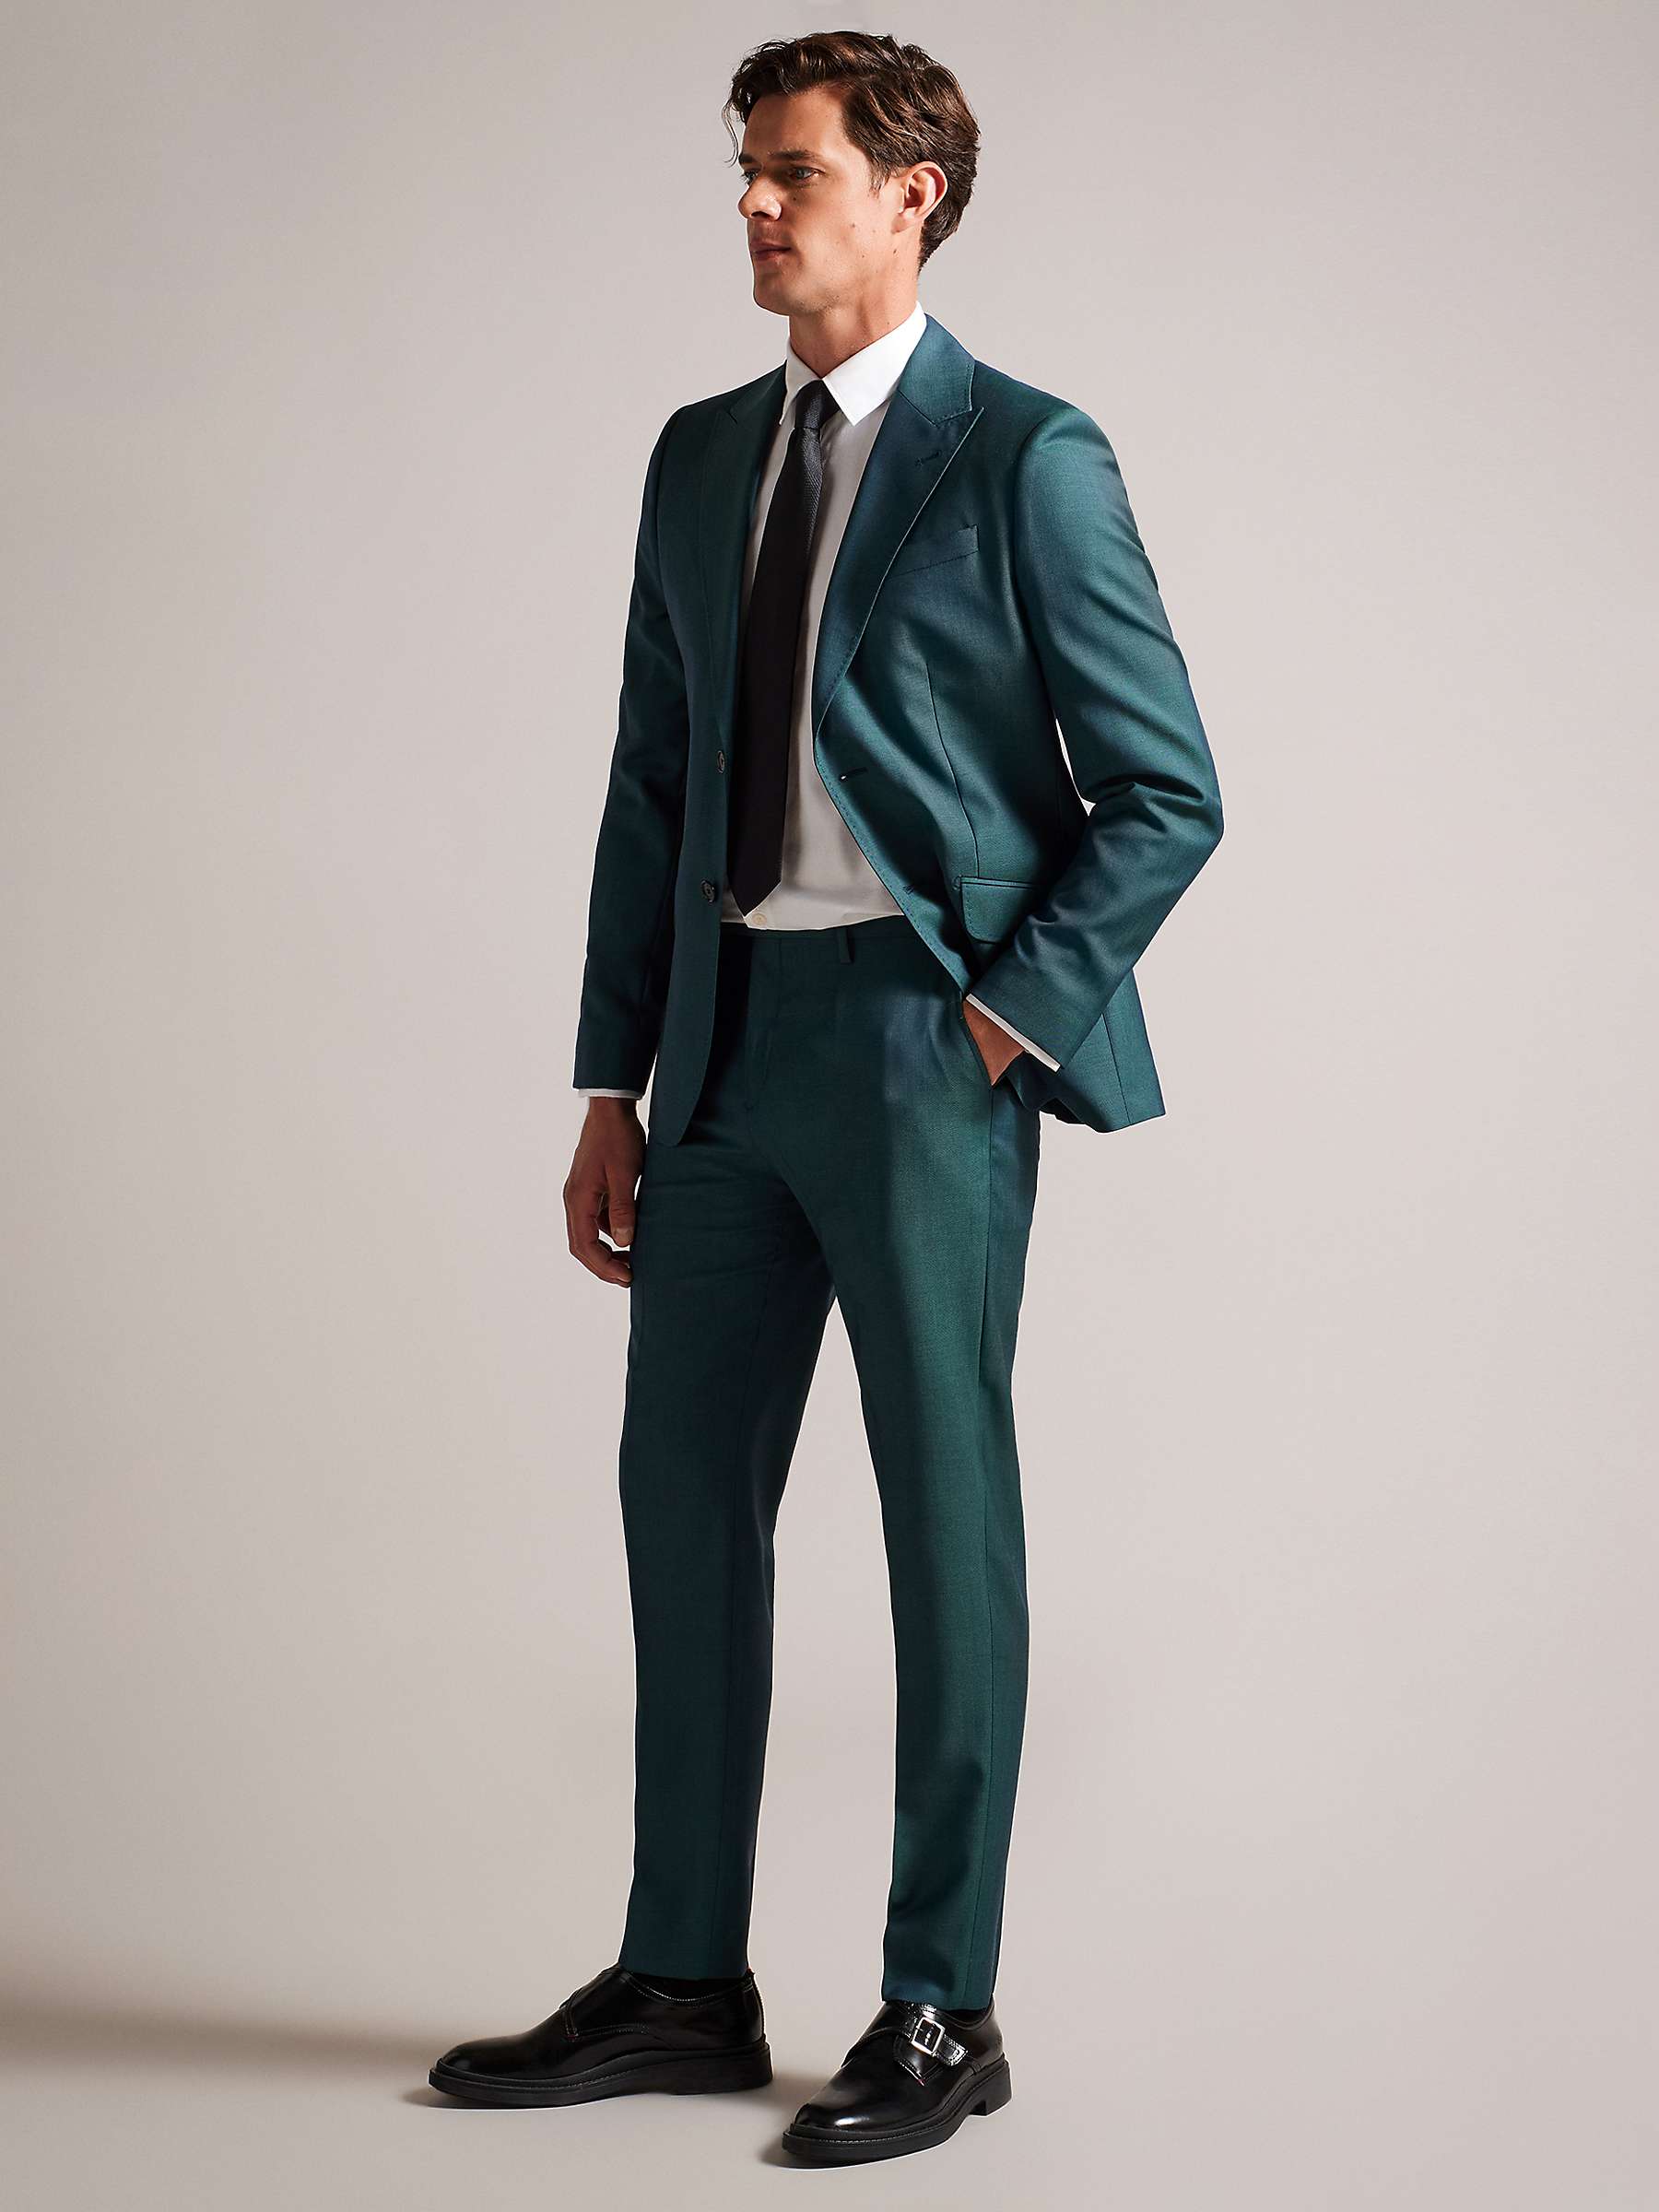 Ted Baker Northj Wool Tonic Suit Jacket, Blue Teal at John Lewis & Partners